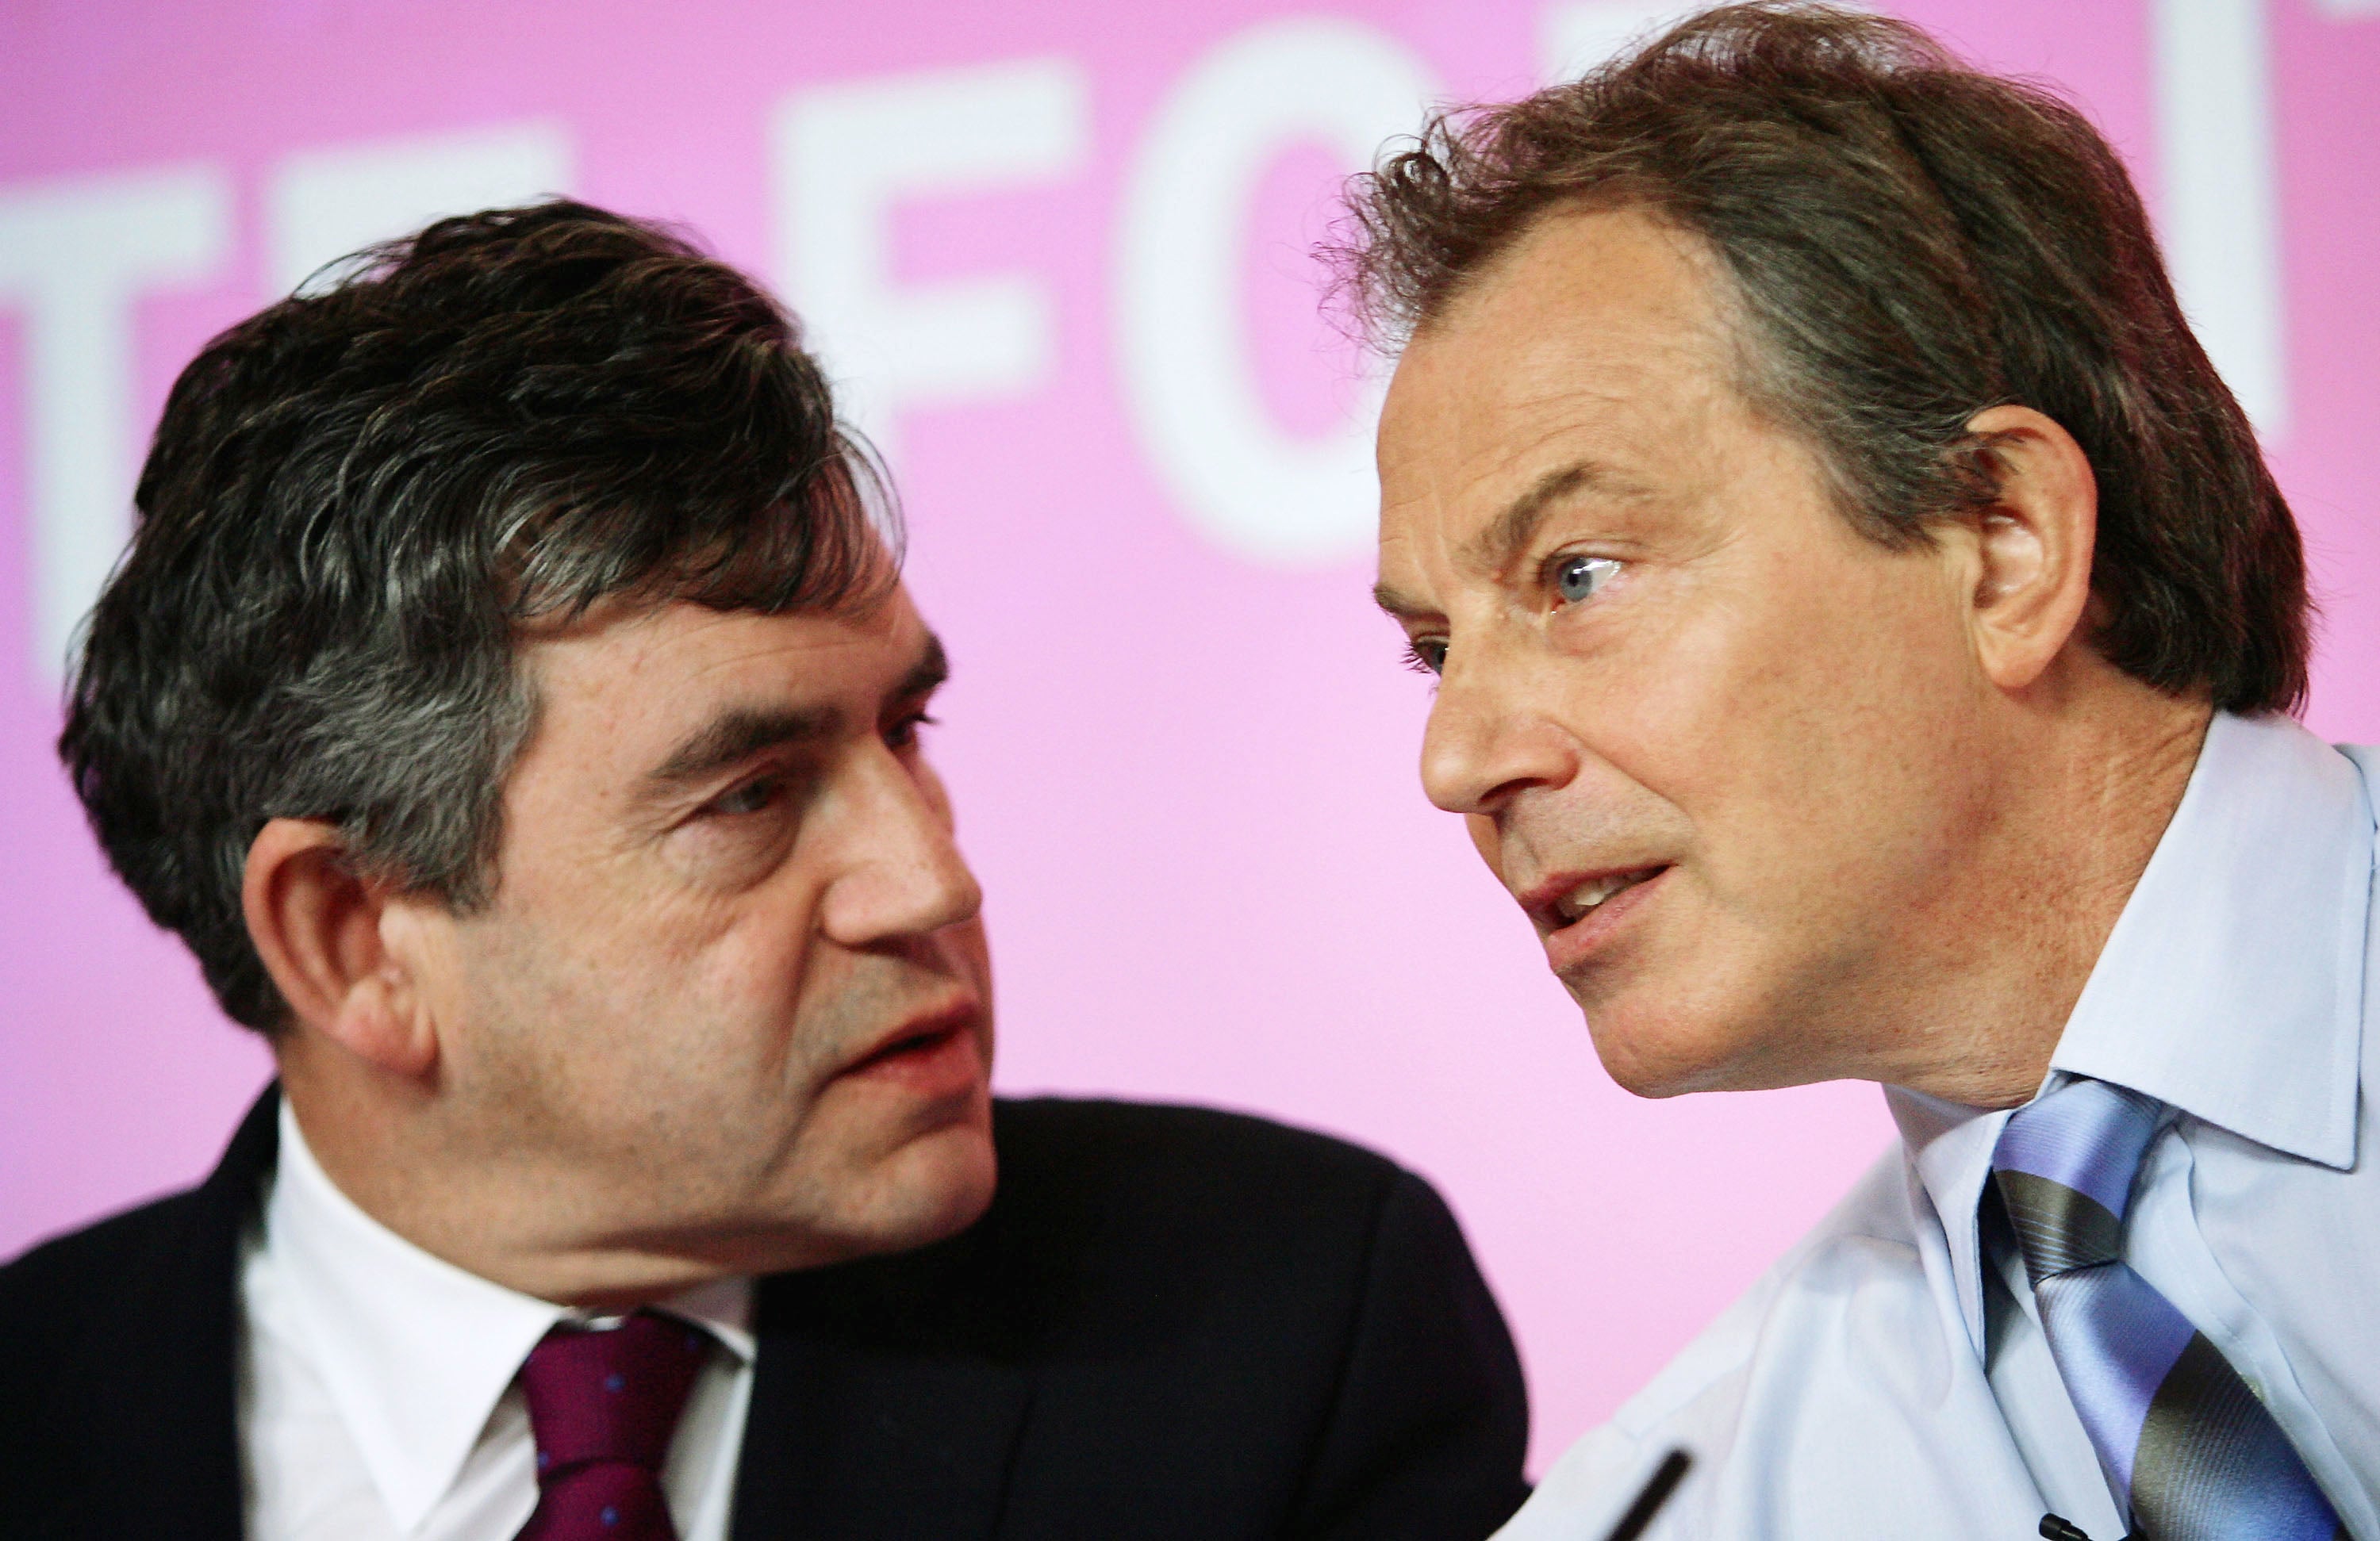 Labour’s record would have been worse if Blair or Brown had agreed too much